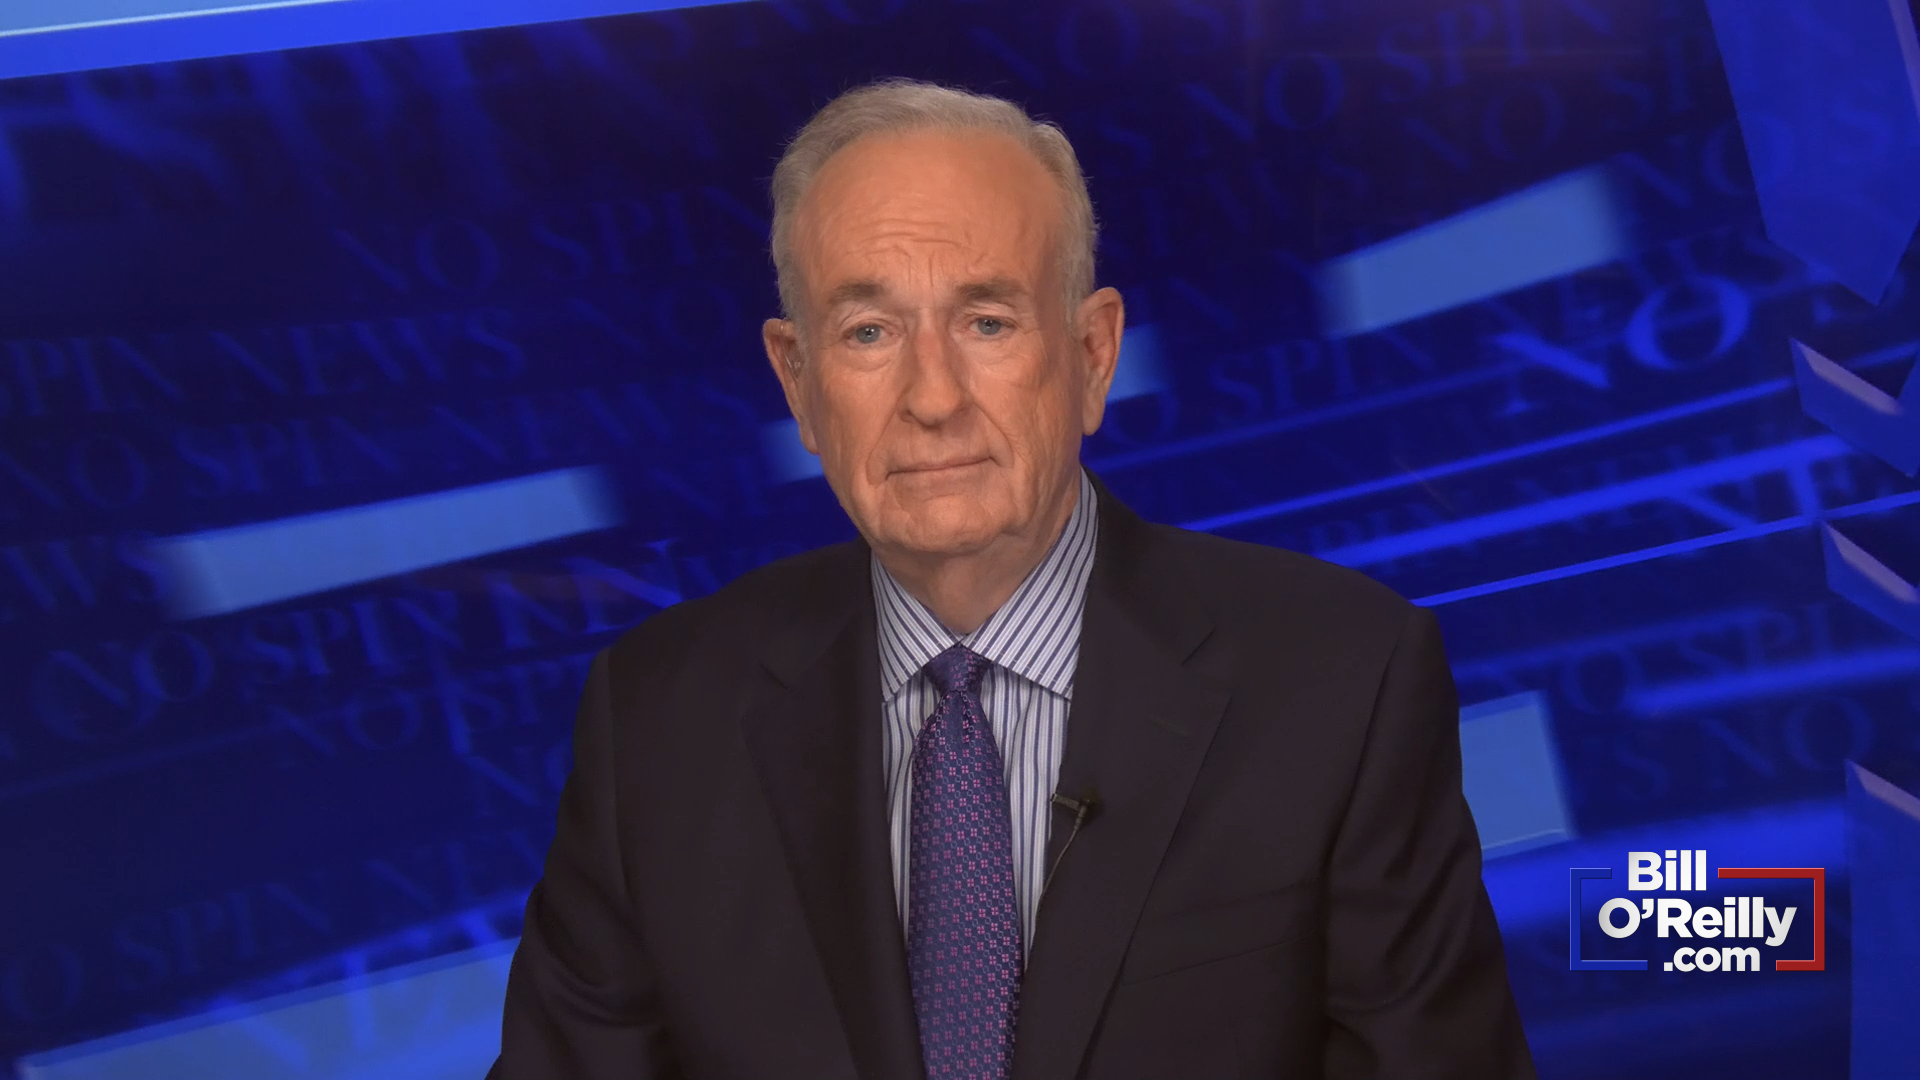 O'Reilly: 'San Francisco is Going to be a Ghost Town'